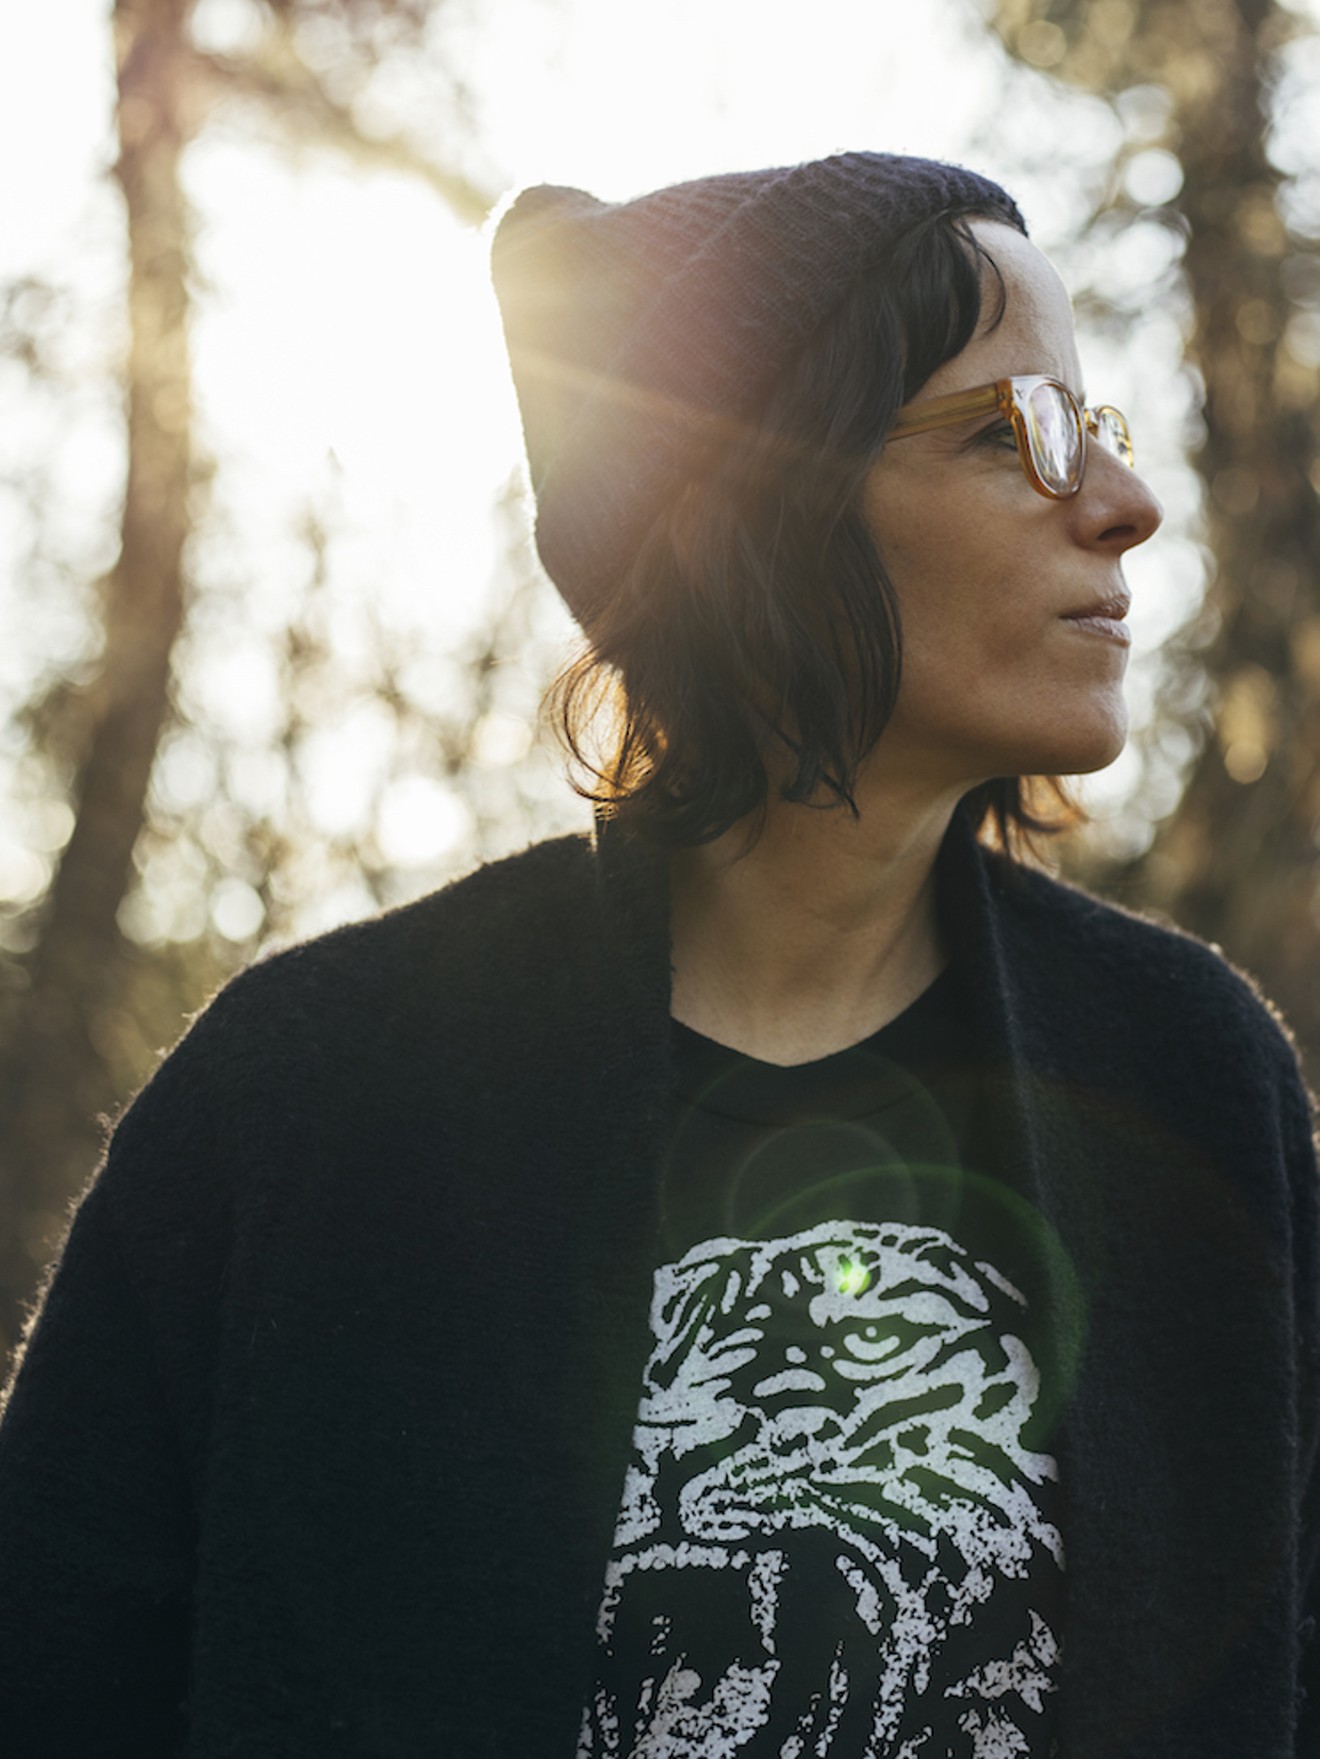 Sera Cahoone's latest album, From Where I Started, was released on March 14.